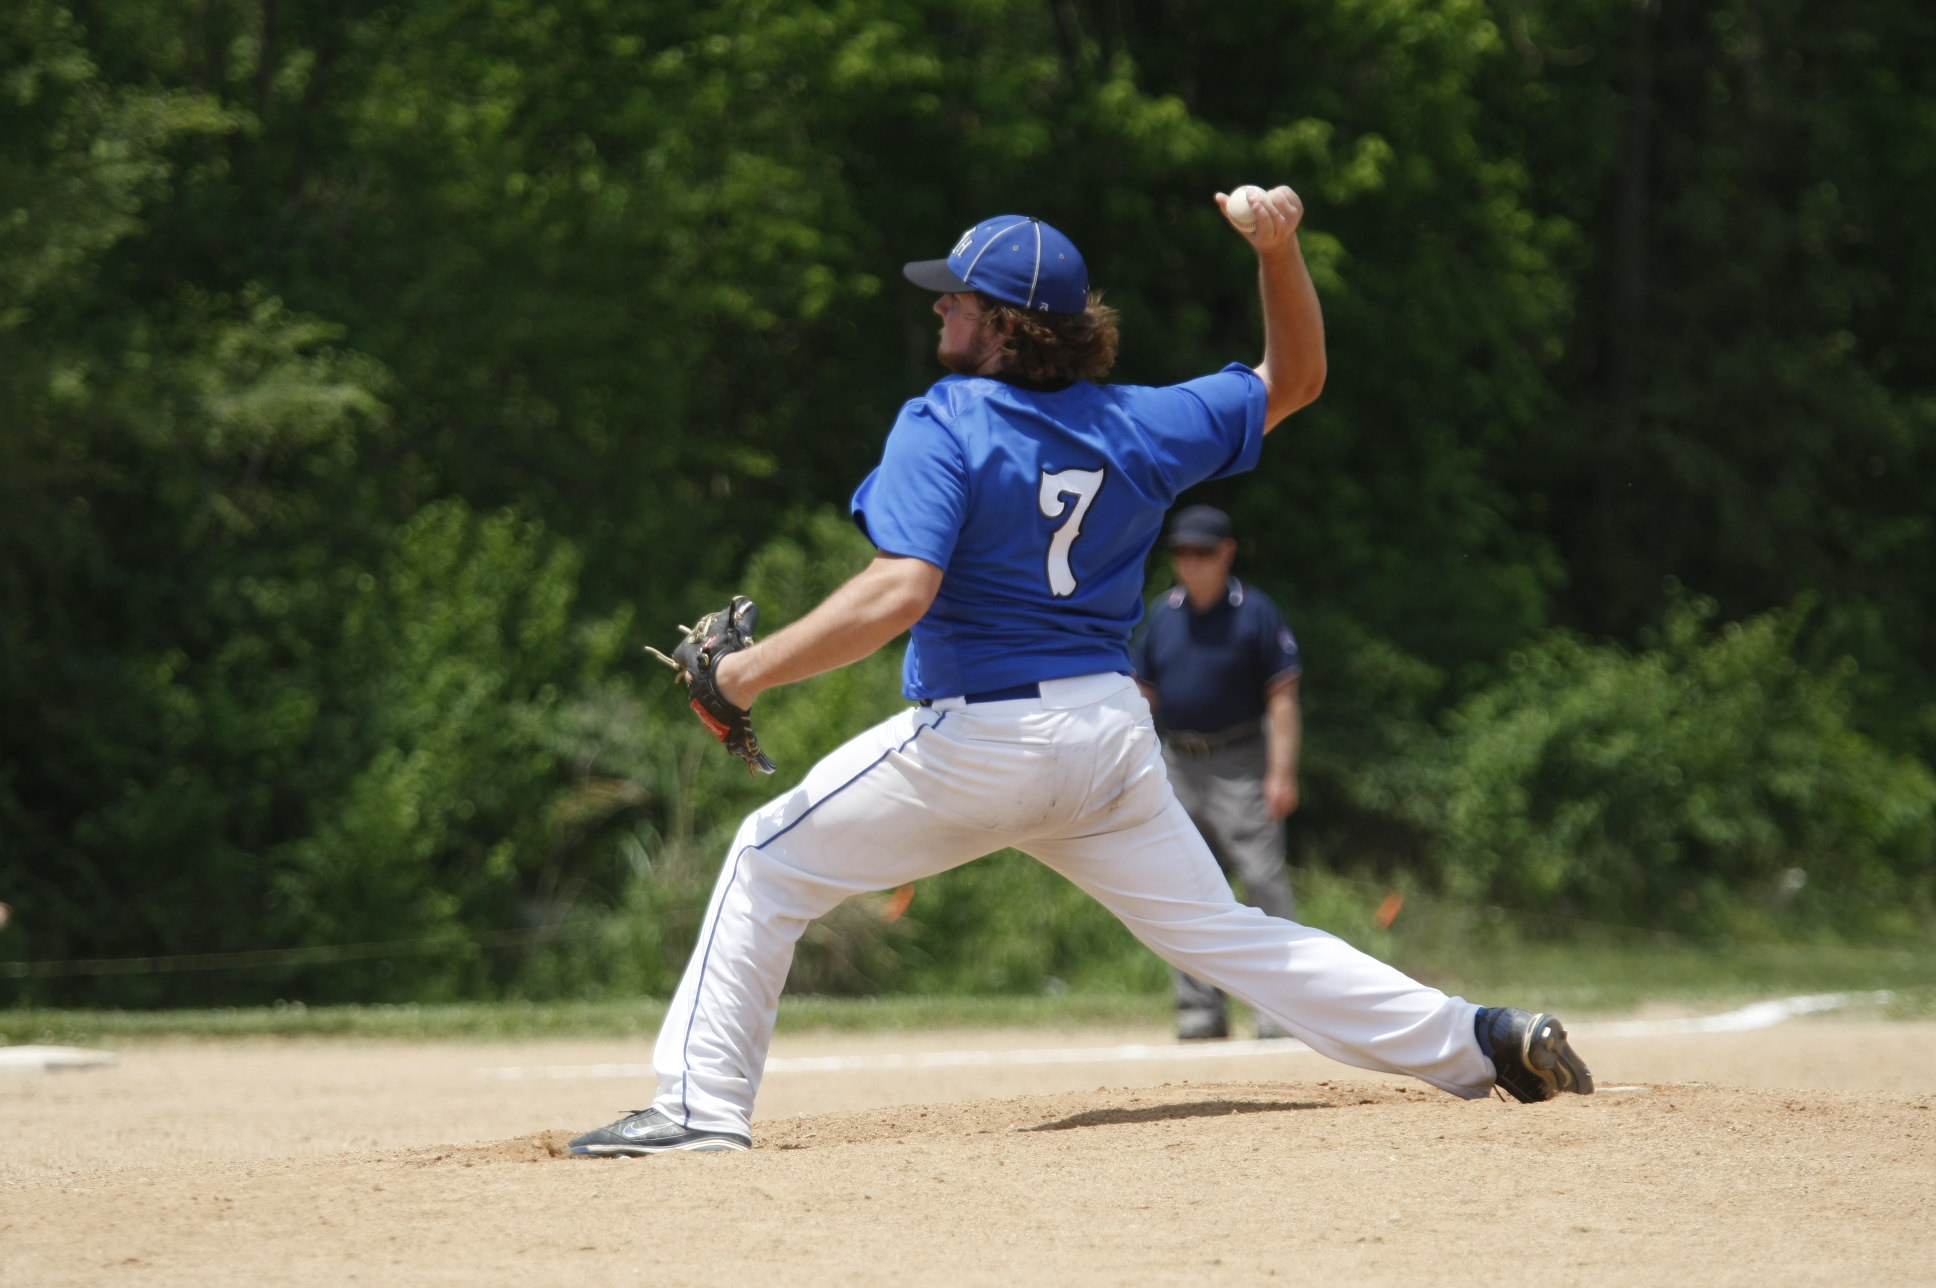 MRH baseball falls in state sectional with young team